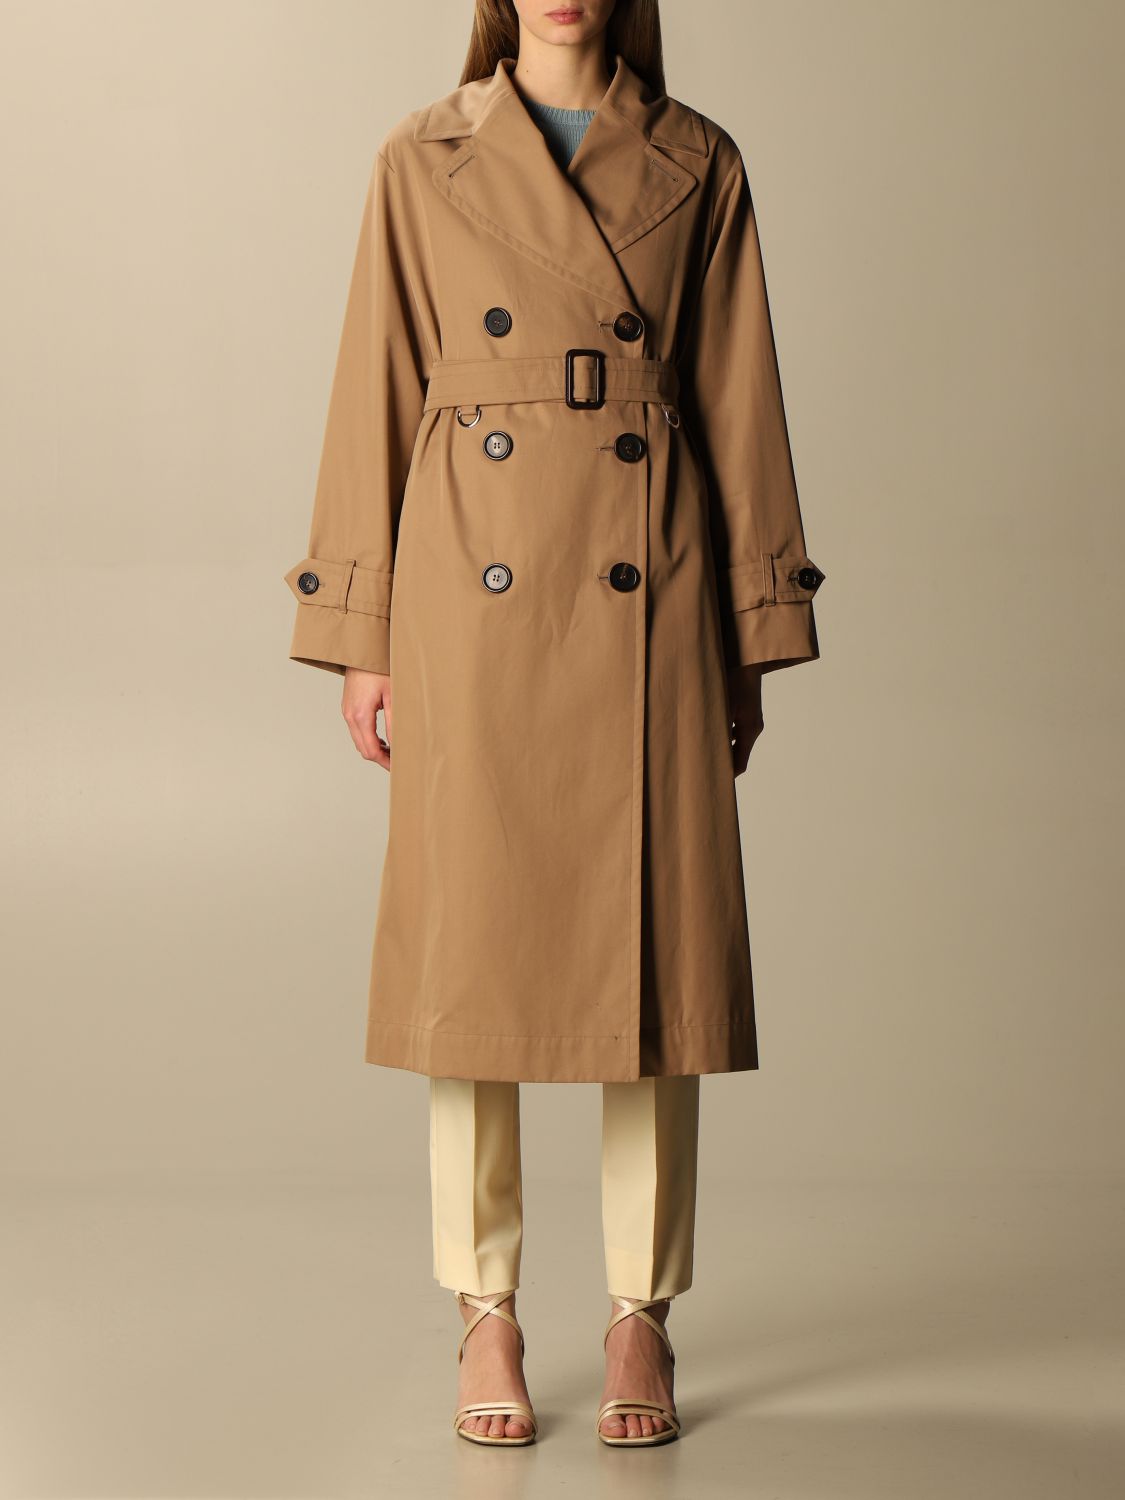 MAX MARA THE CUBE: Dimper double-breasted trench coat - Camel | Max ...